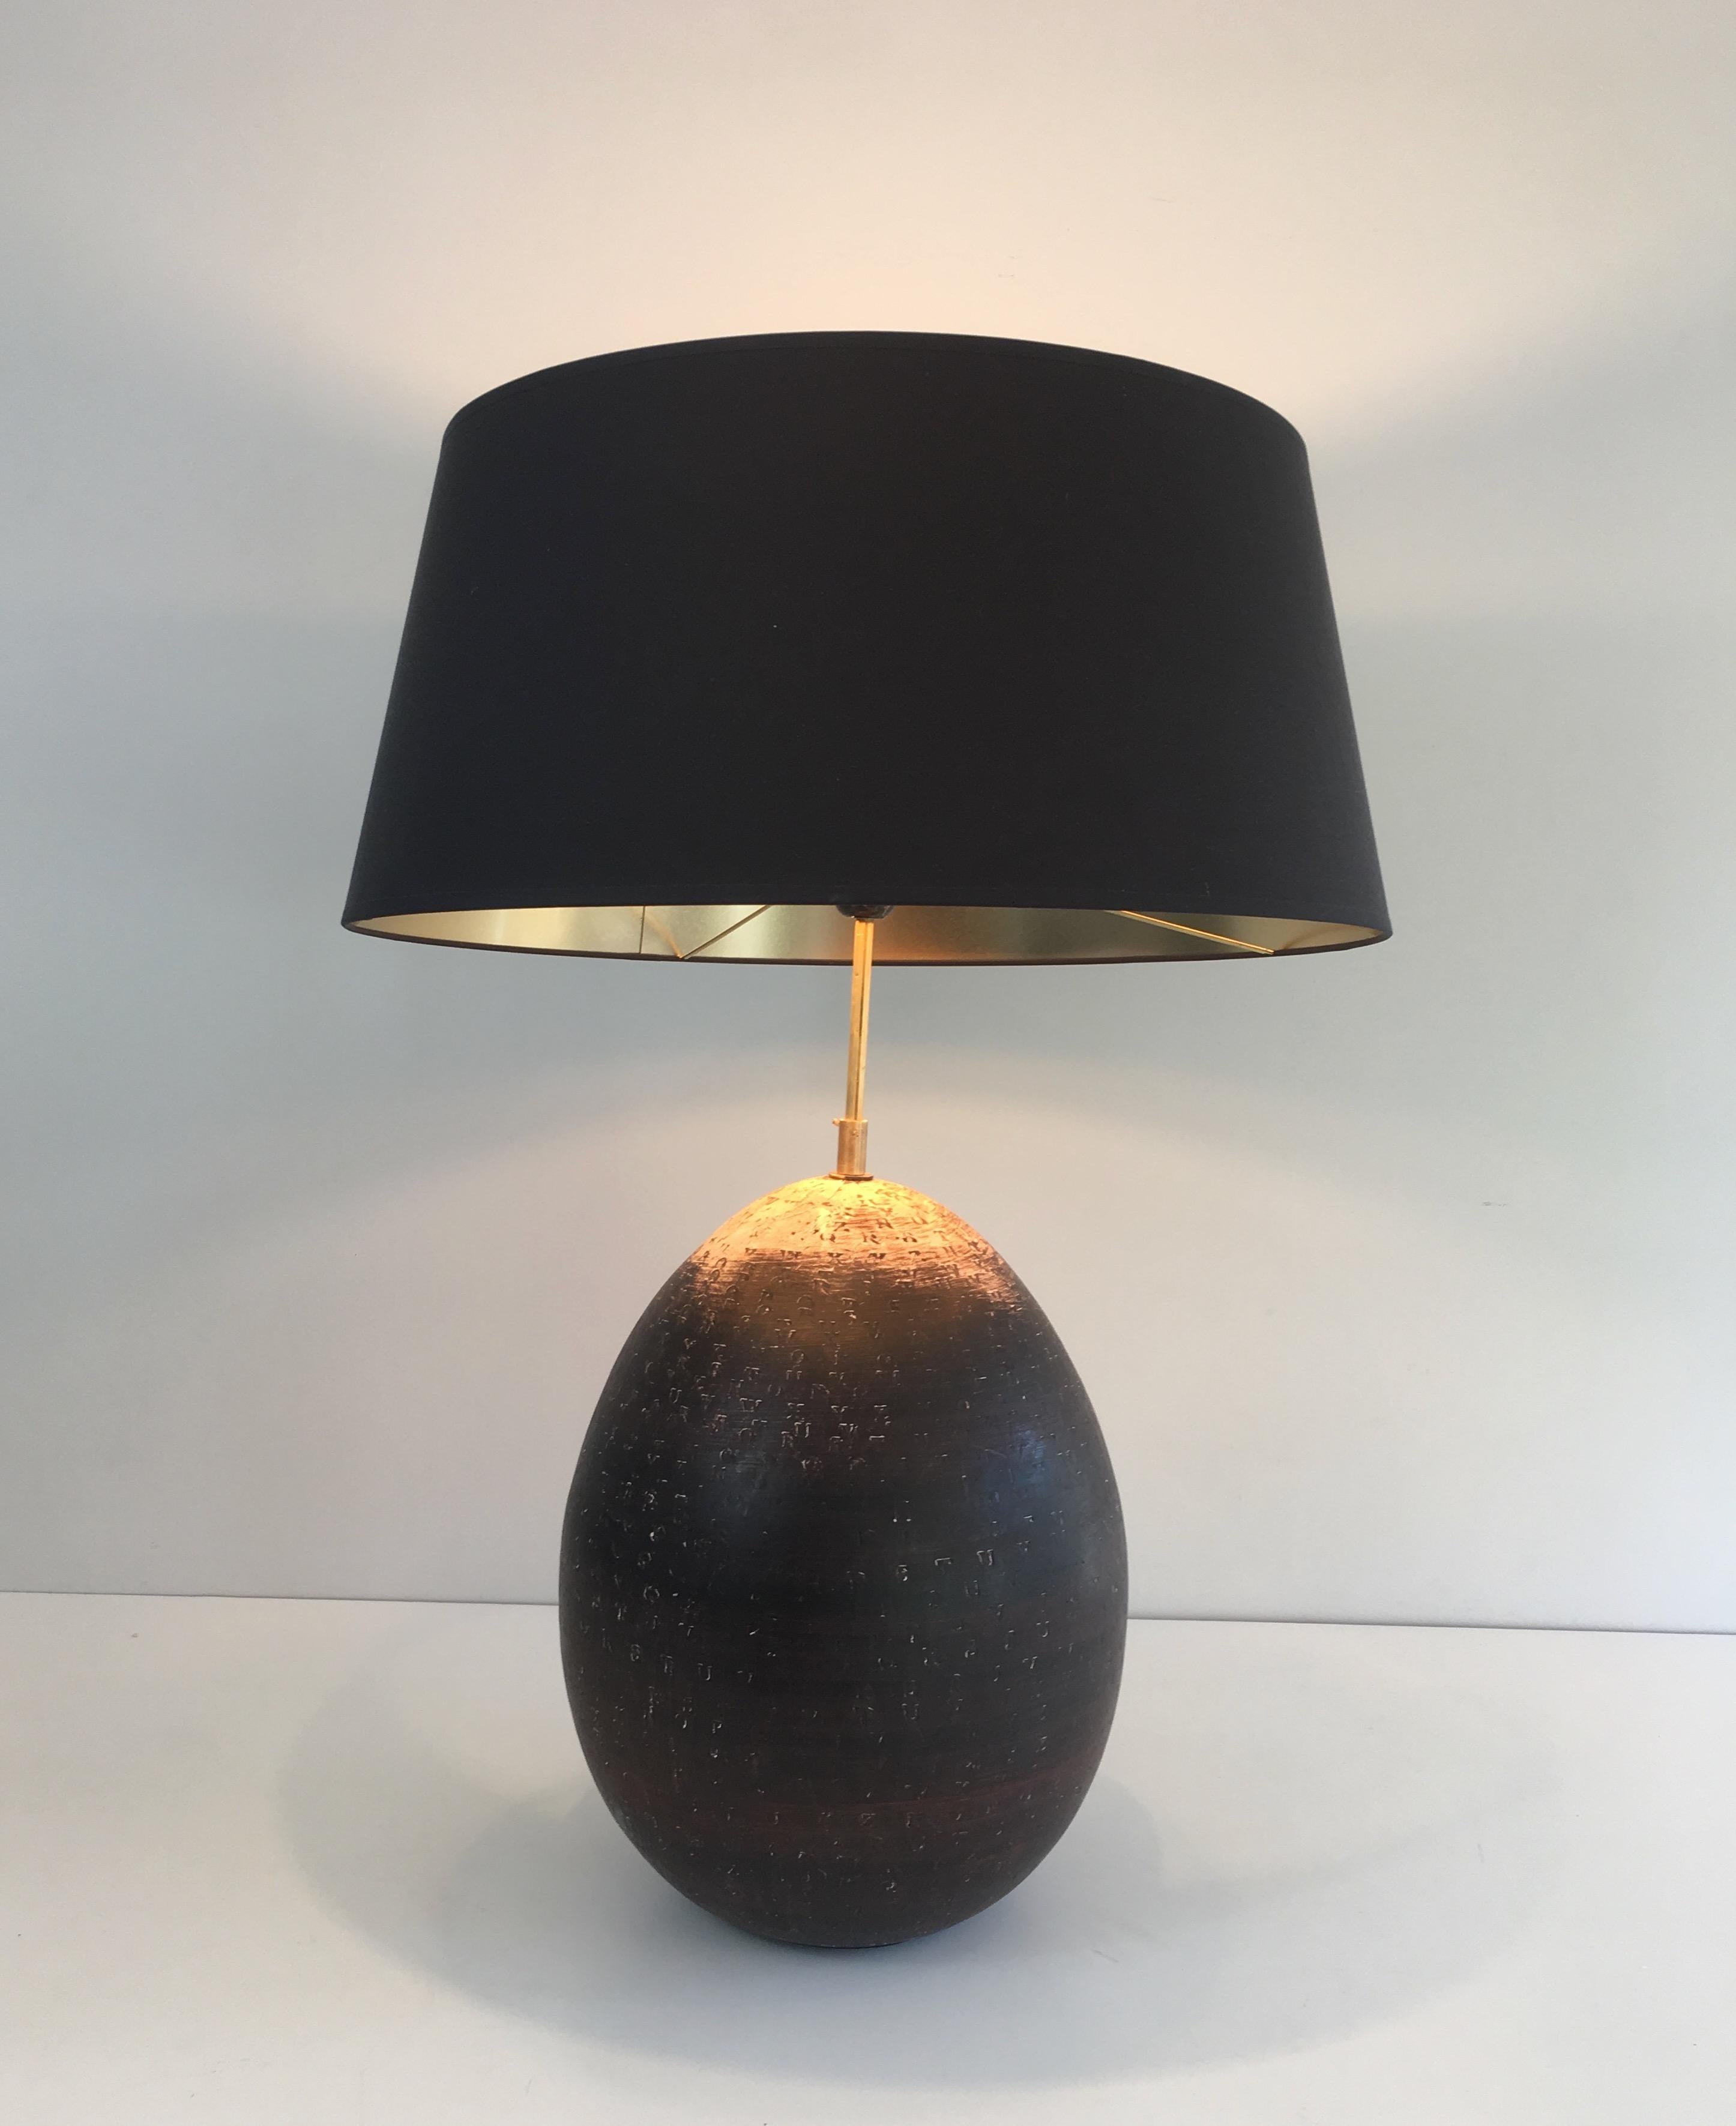 This decorative table lamp is made of ceramic stamped with letters. The height of the lamp can be adjusted. This is a French work, circa 1970.